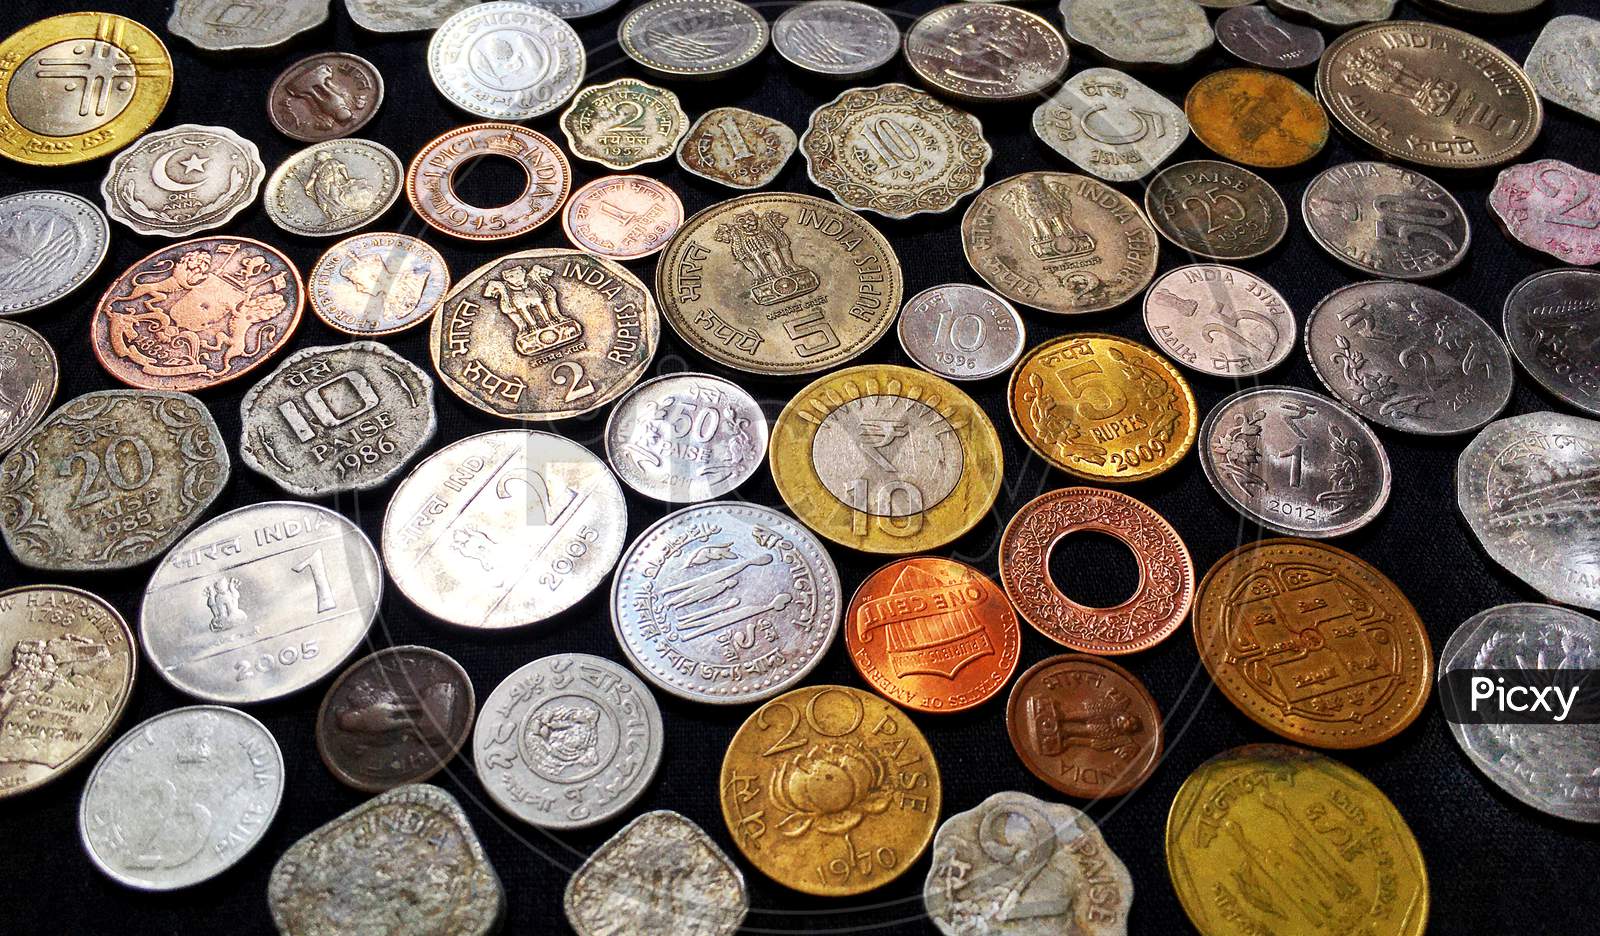 A collection of coins on black background